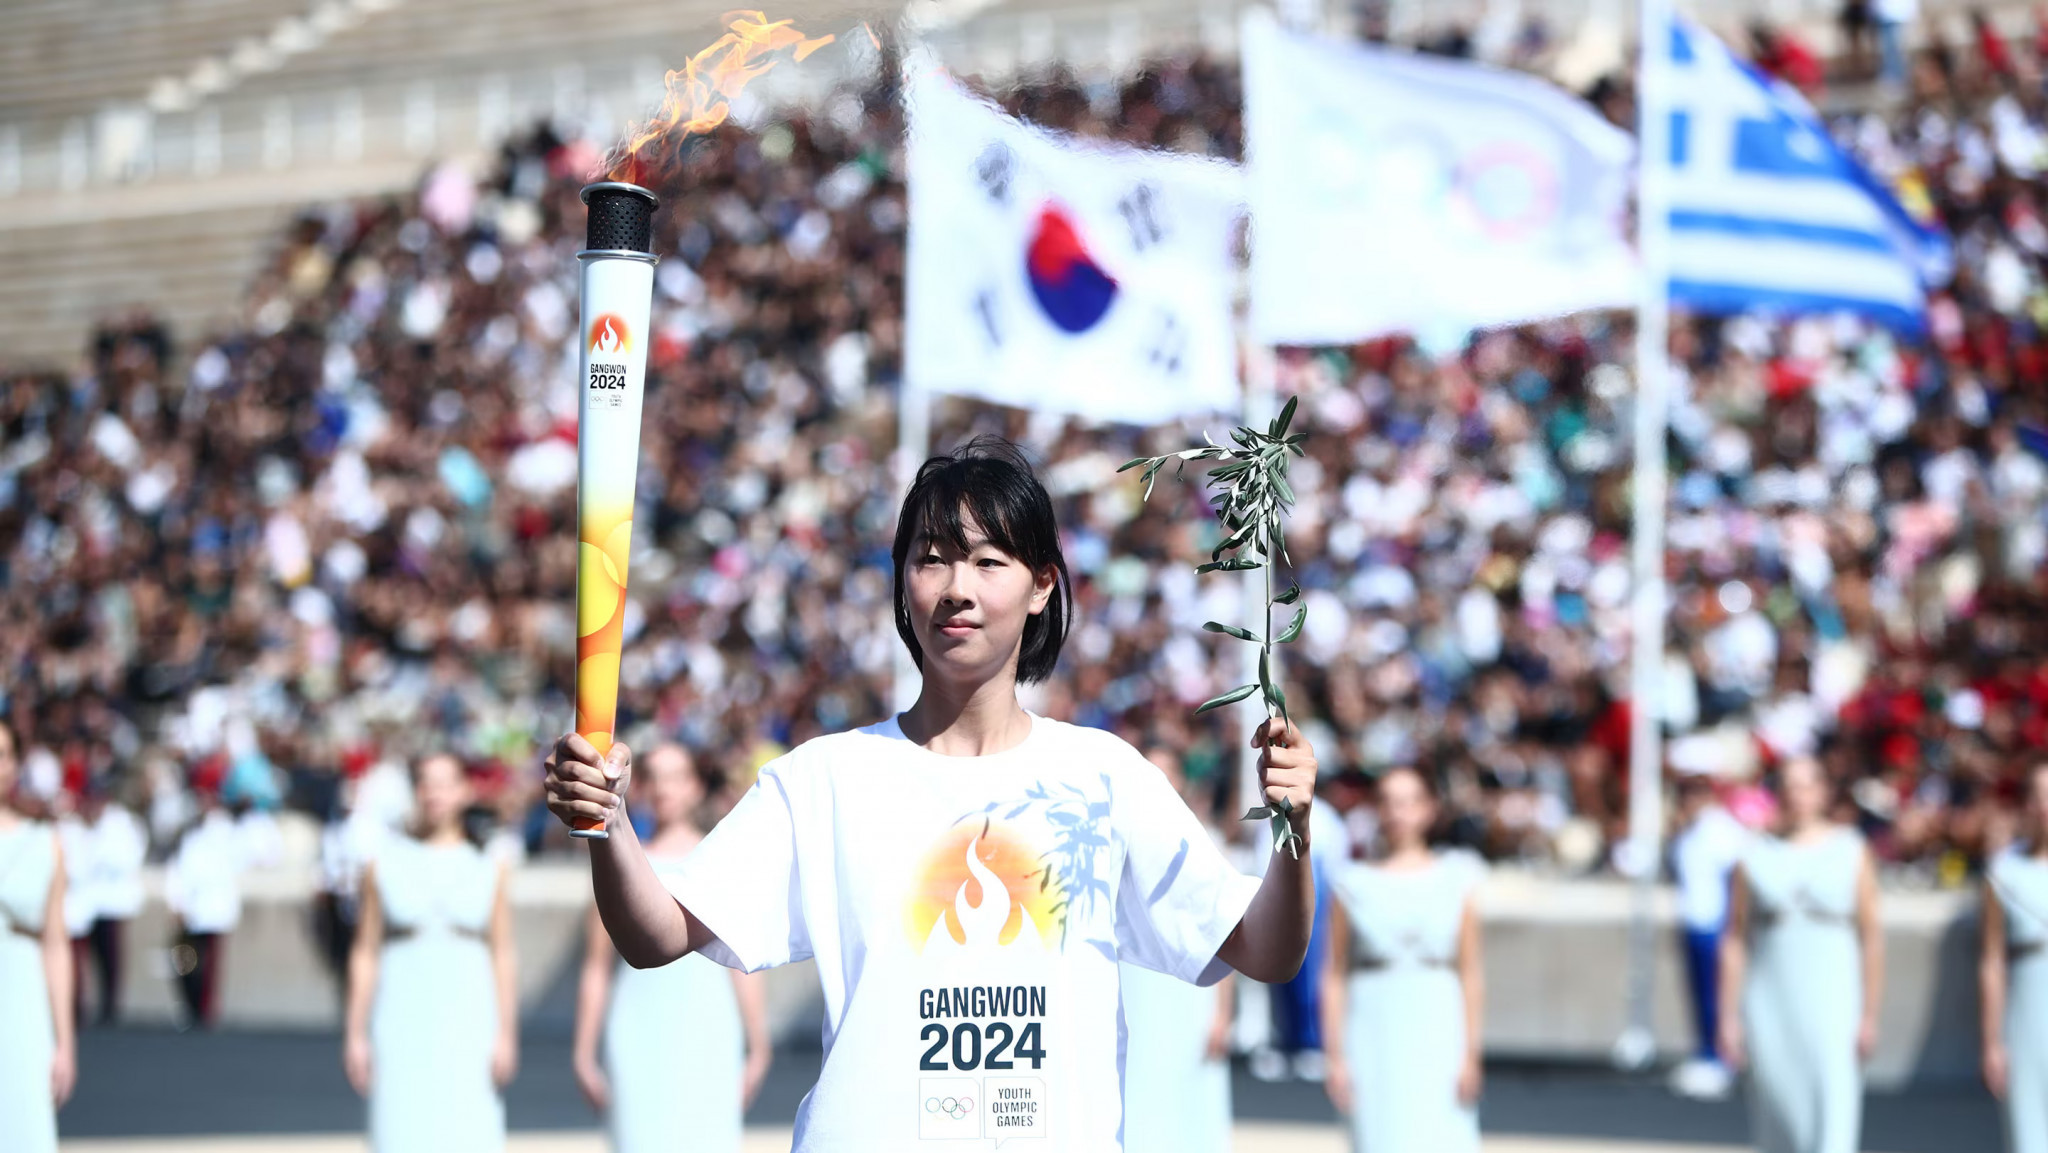 Flame lit for "journey of solidarity" to Gangwon 2024 Youth Olympics